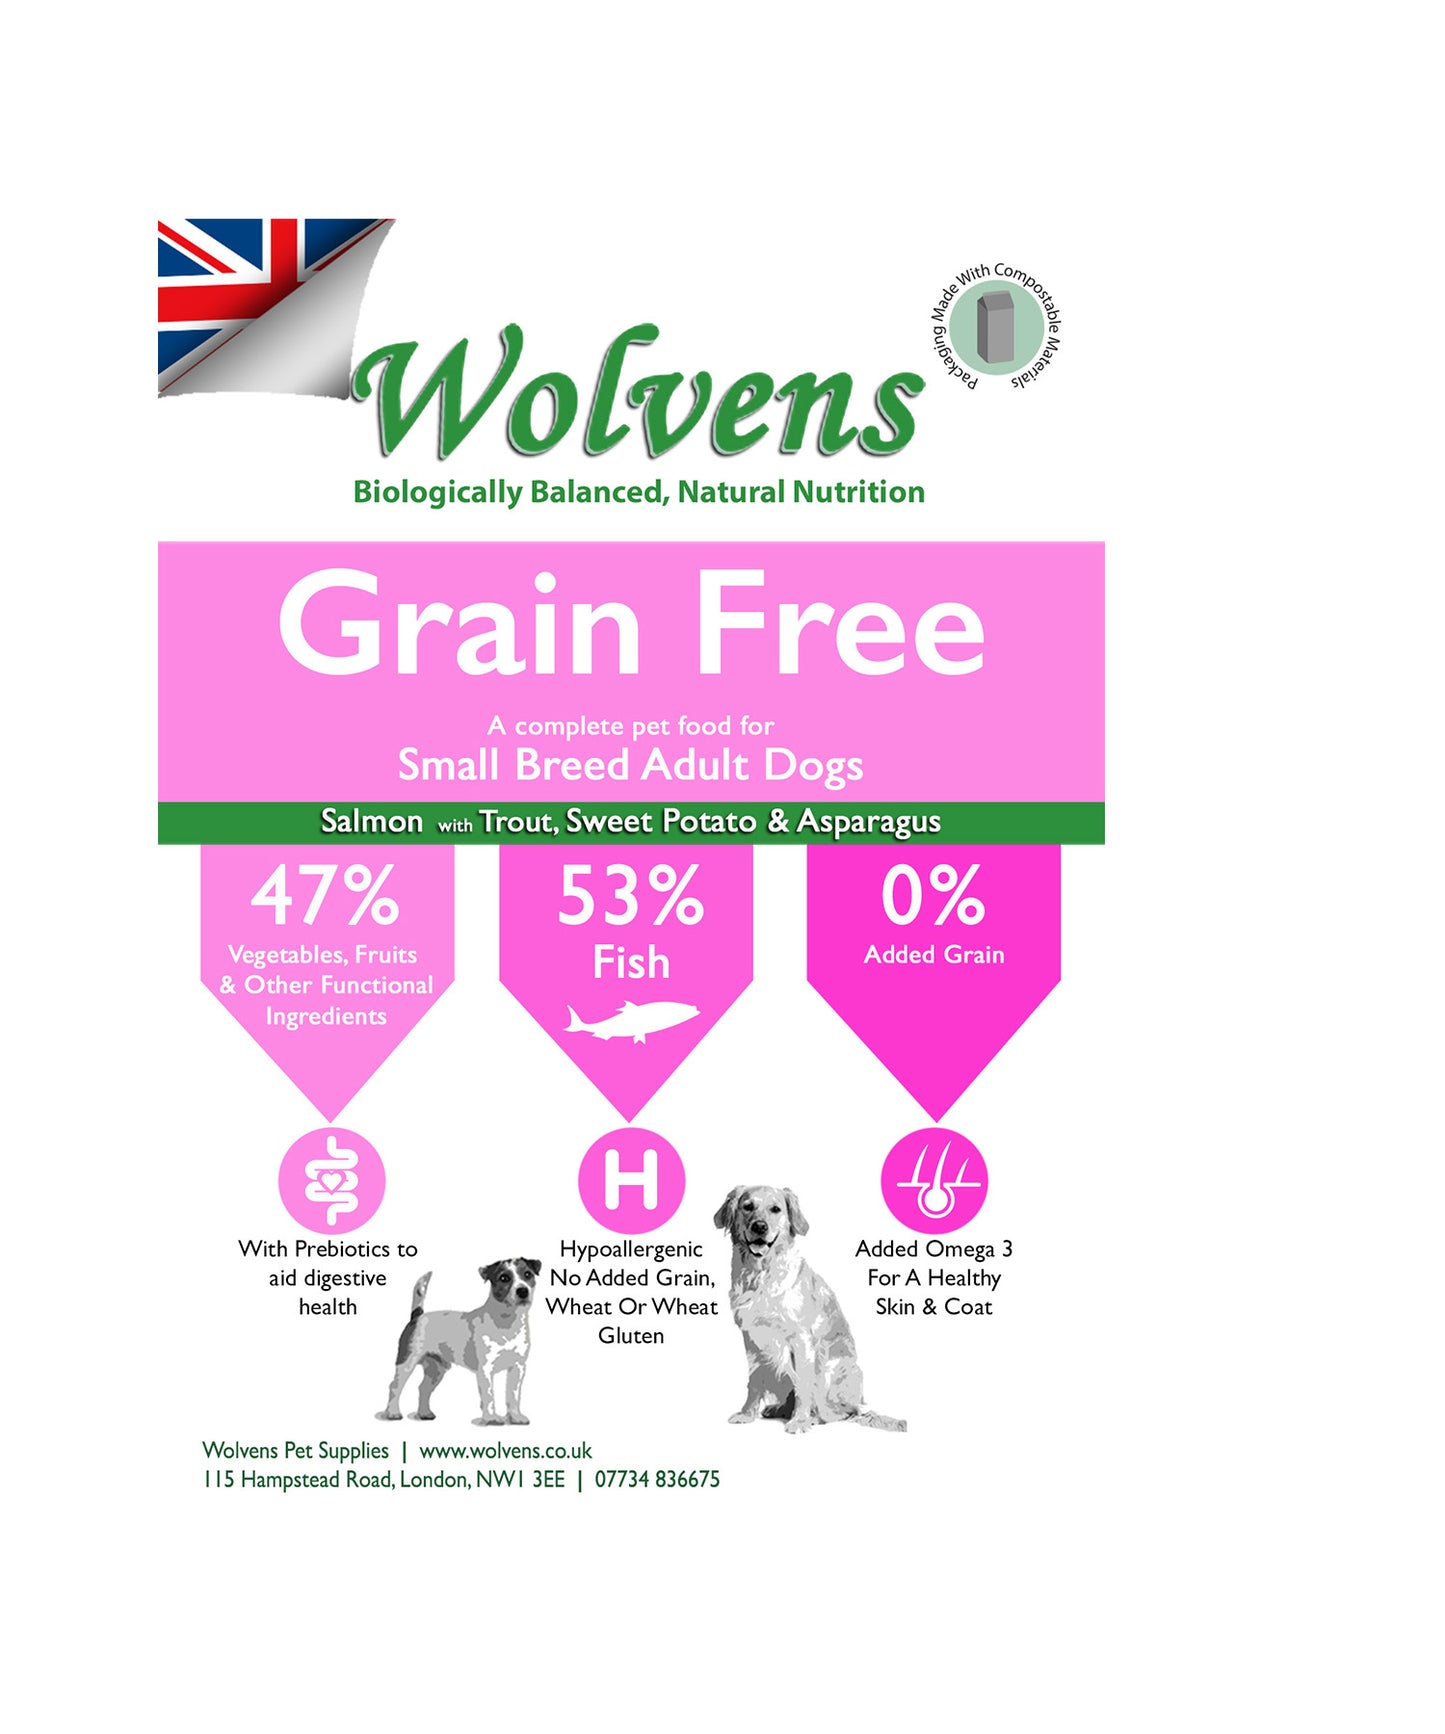 Wolvens Grain Free Adult Small Breed. Salmon, Trout with Sweet Potato & Asparagus.